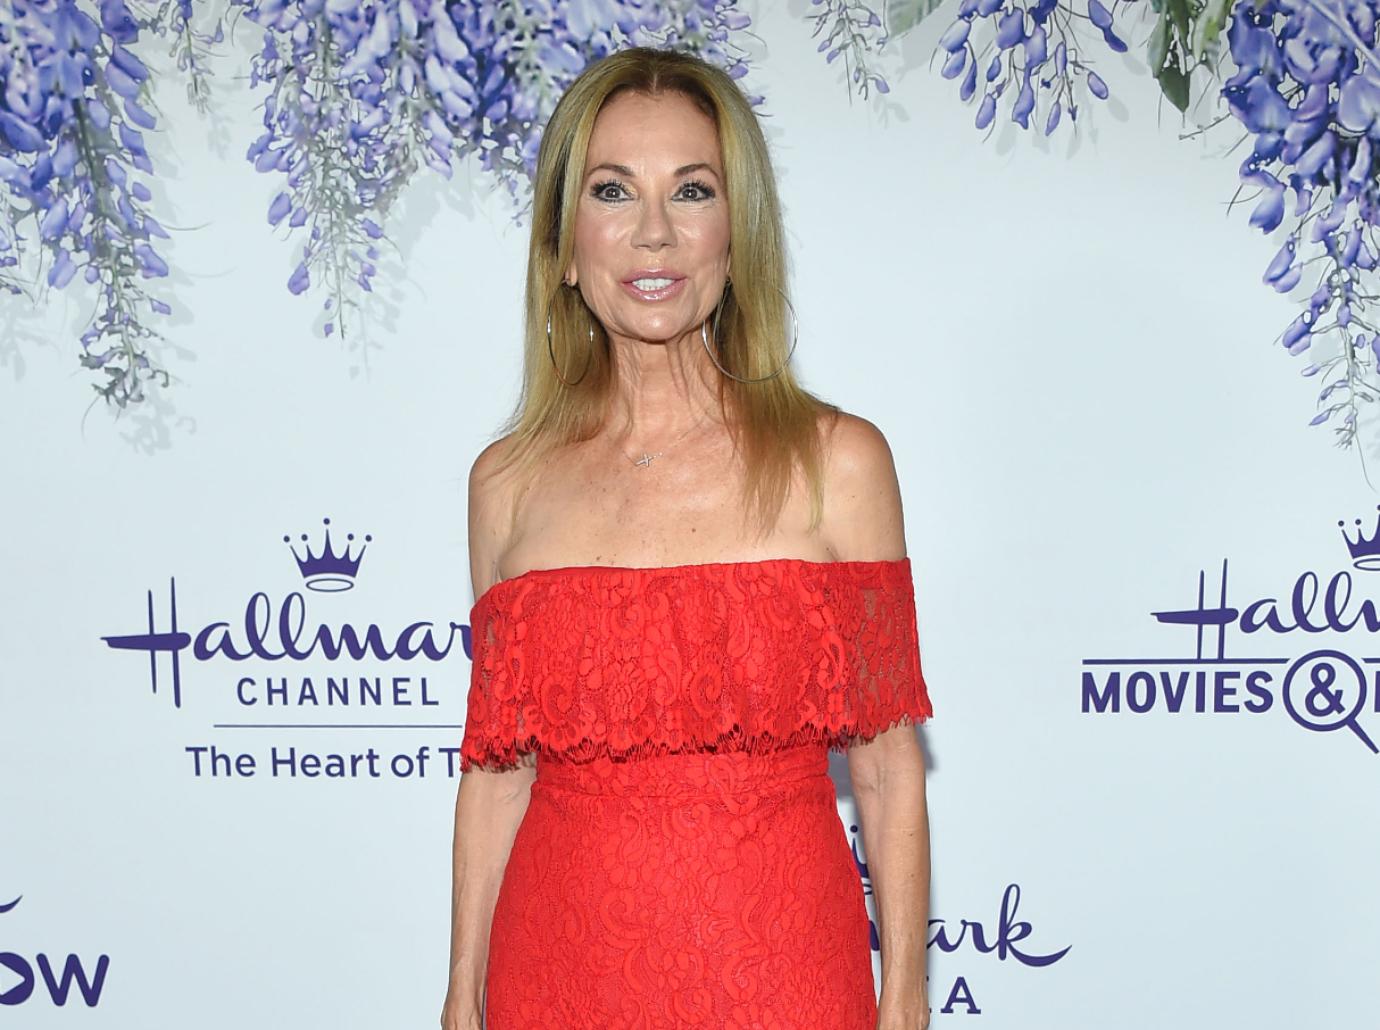 Kathie Lee Wants To Make Things Official With Randy Cronk: Source